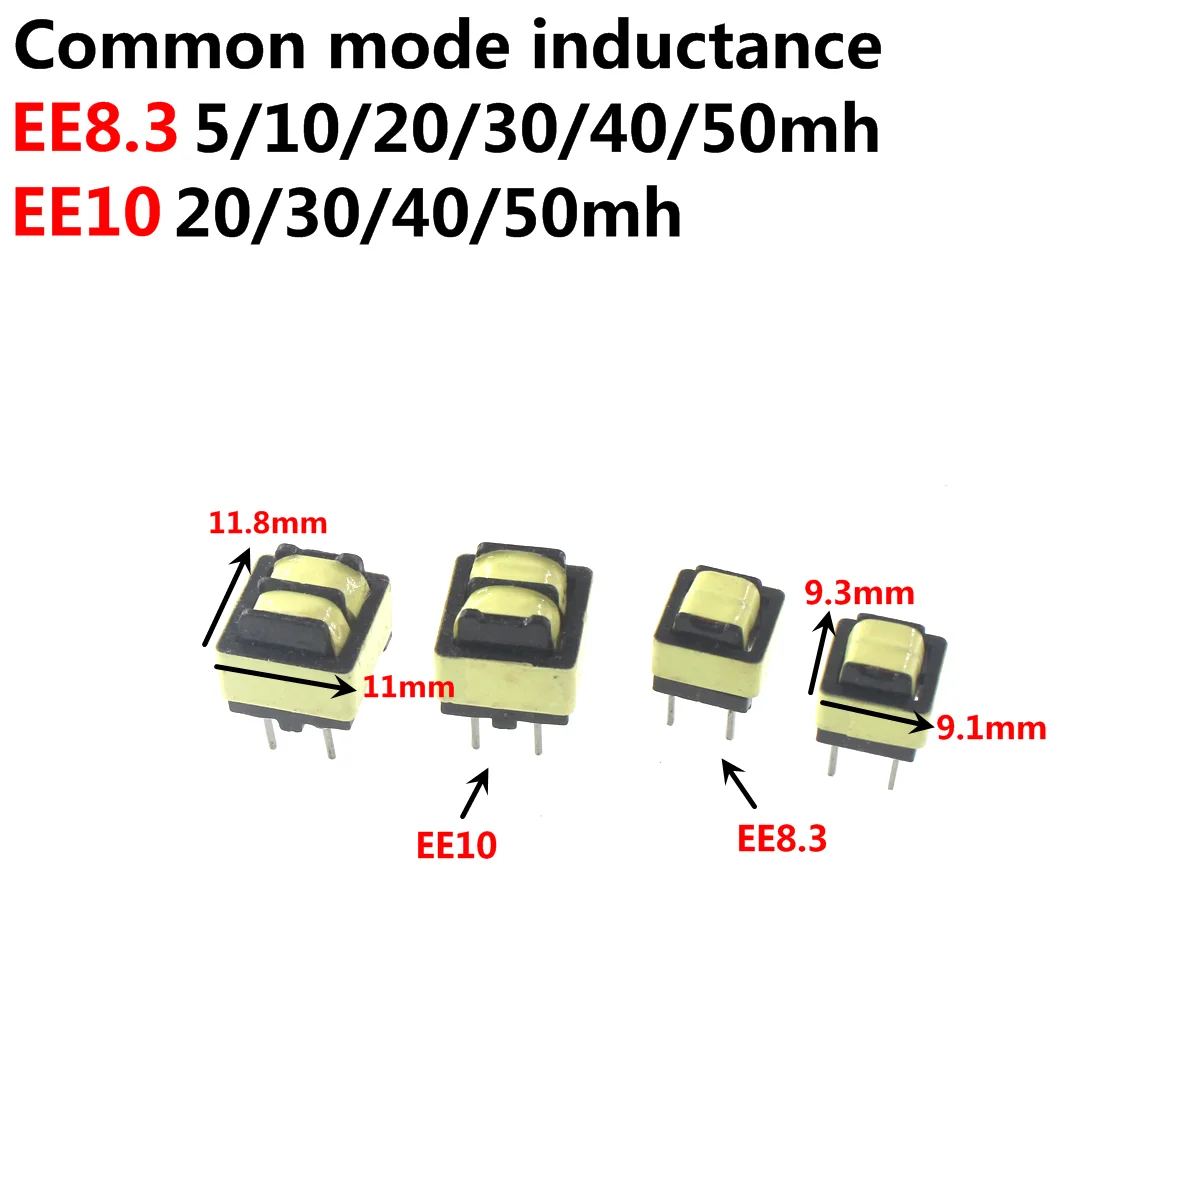 20pcs Common Mode Inductance EE8.3 EE10 EE12 10MH 20MH 30MH 40MH 50MH 60MH 100MH LED Power Filter Inductor Coil Transformer xnrkey 2 5 10 30 50 100 pcs inductance transformer coil for renault megane remote key card